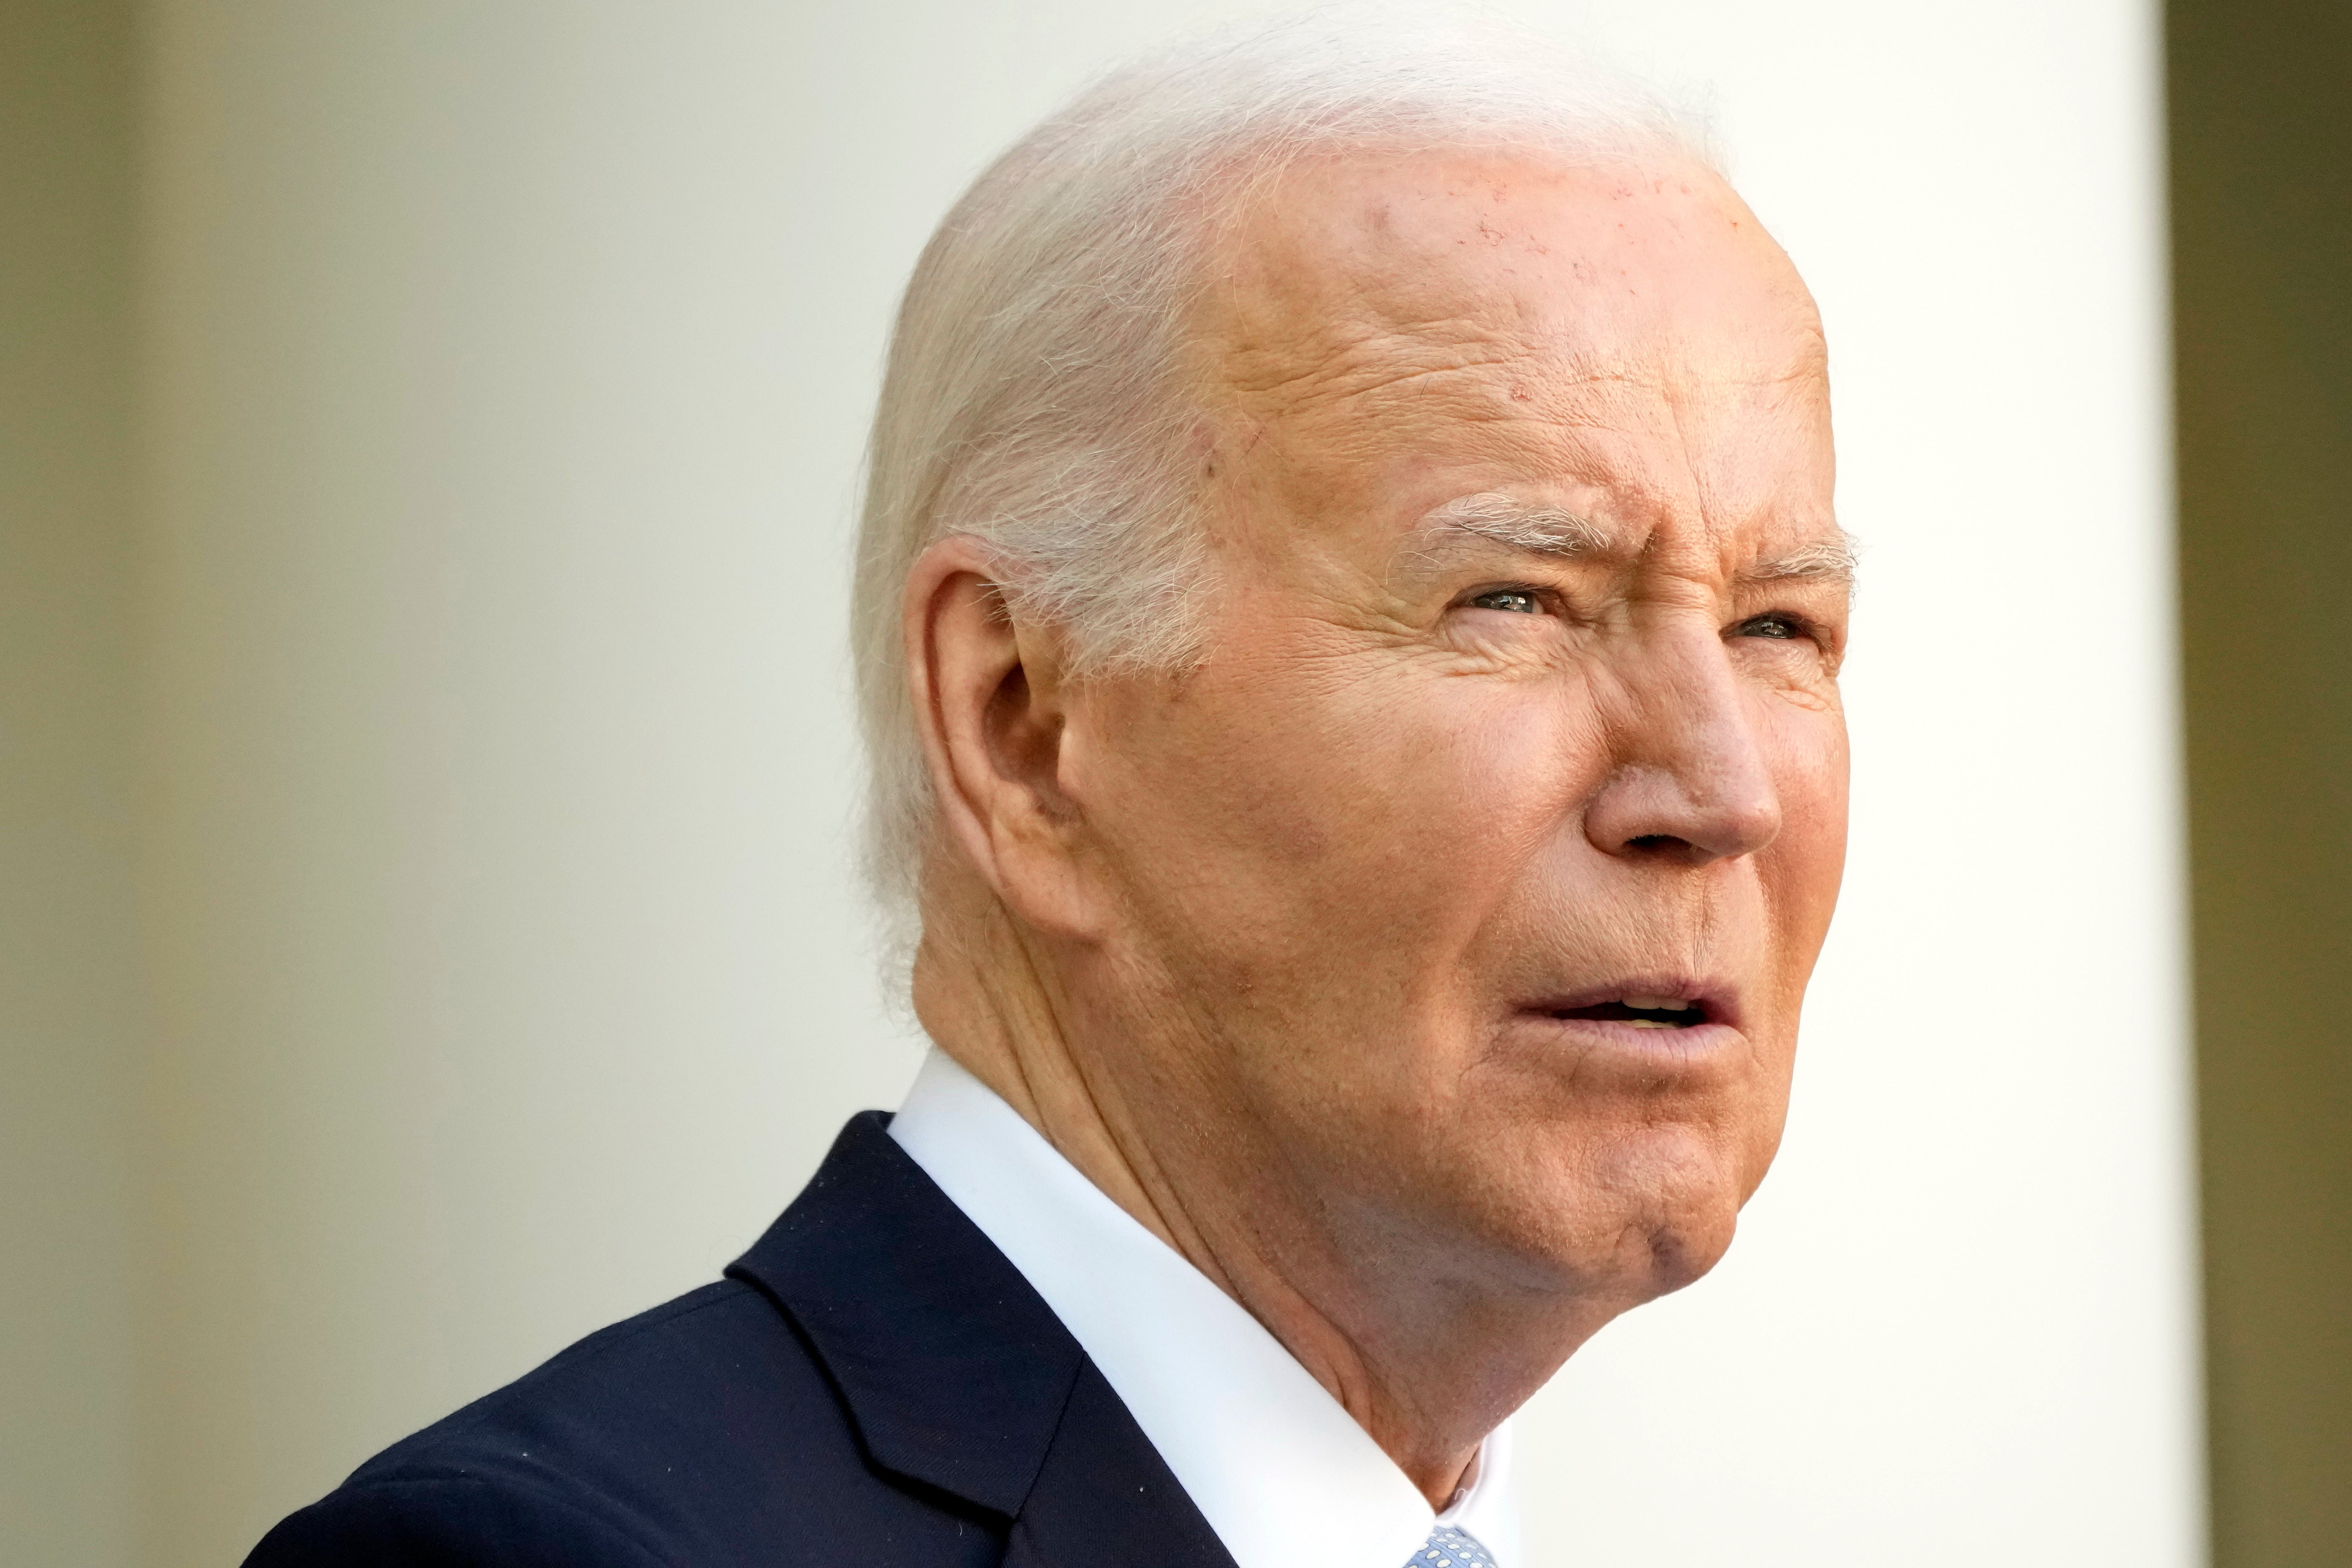 President Joe Biden, pictured in May 2024. He has blamed burn pits for the brain cancer that killed his son Beau, who served in Iraq